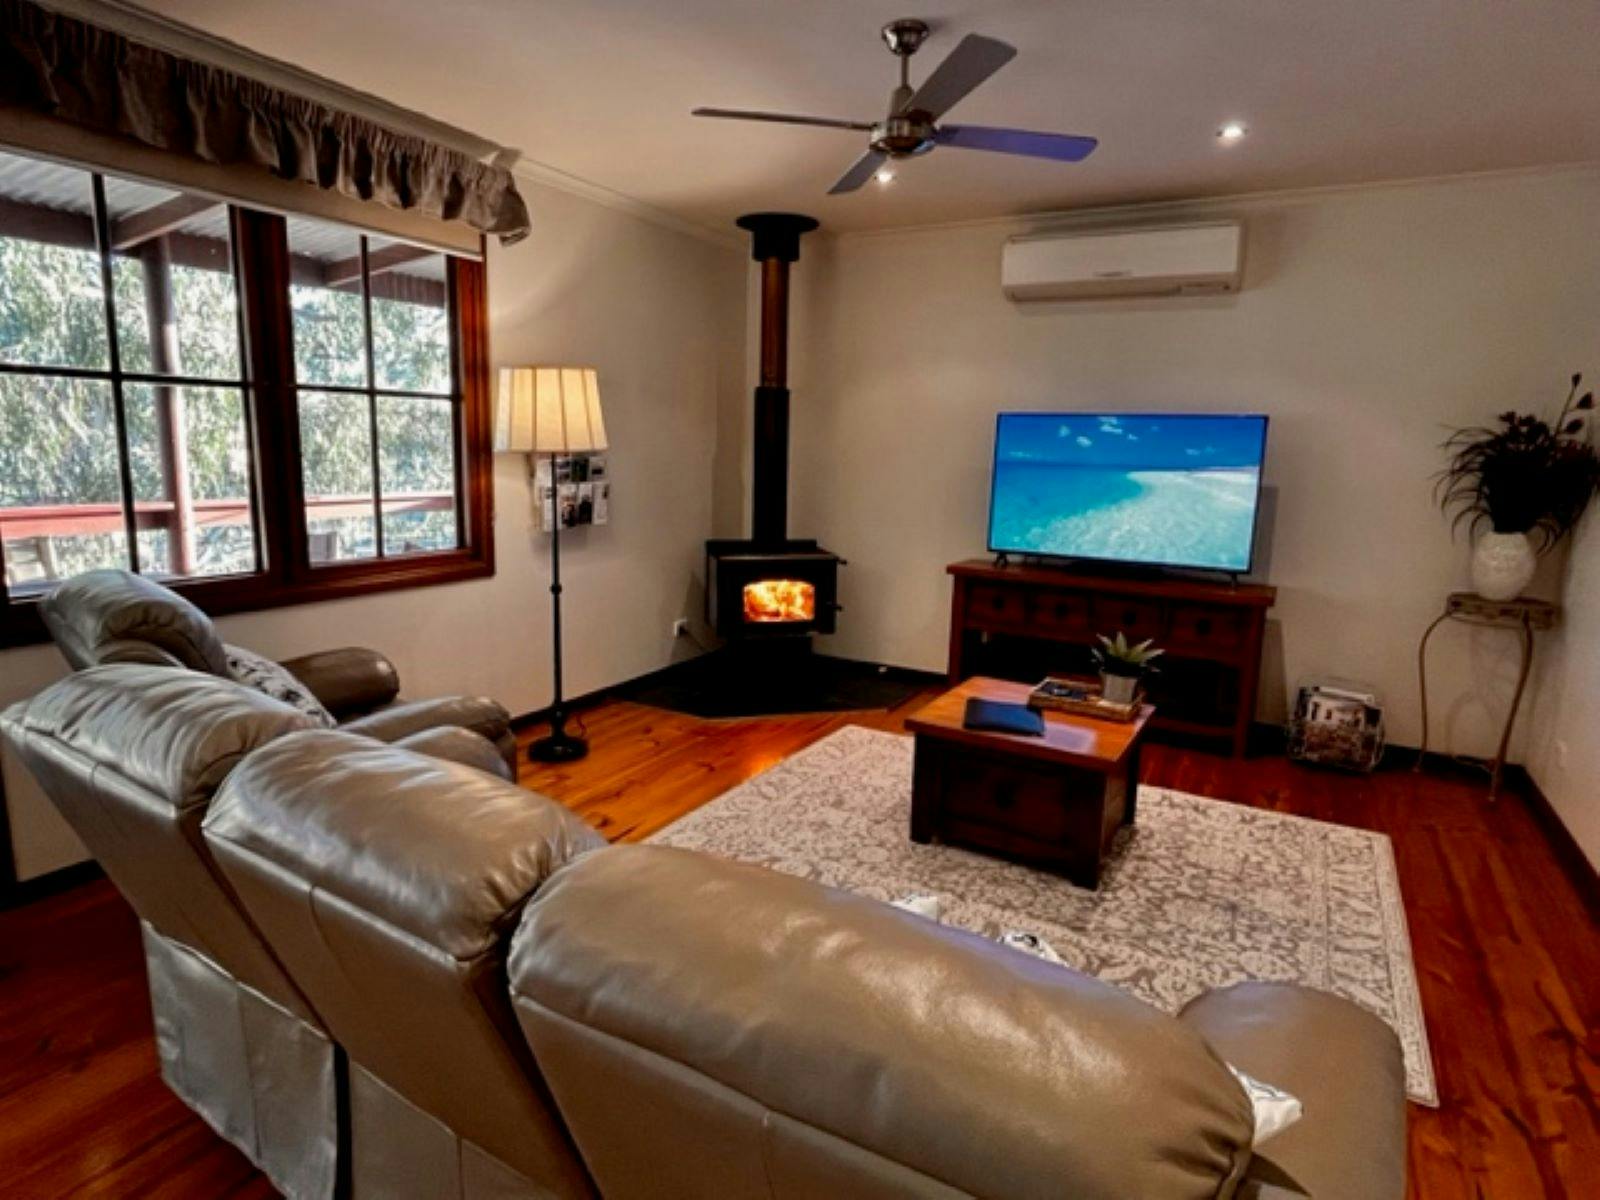 Lounge area with flat screen TV and wood fire